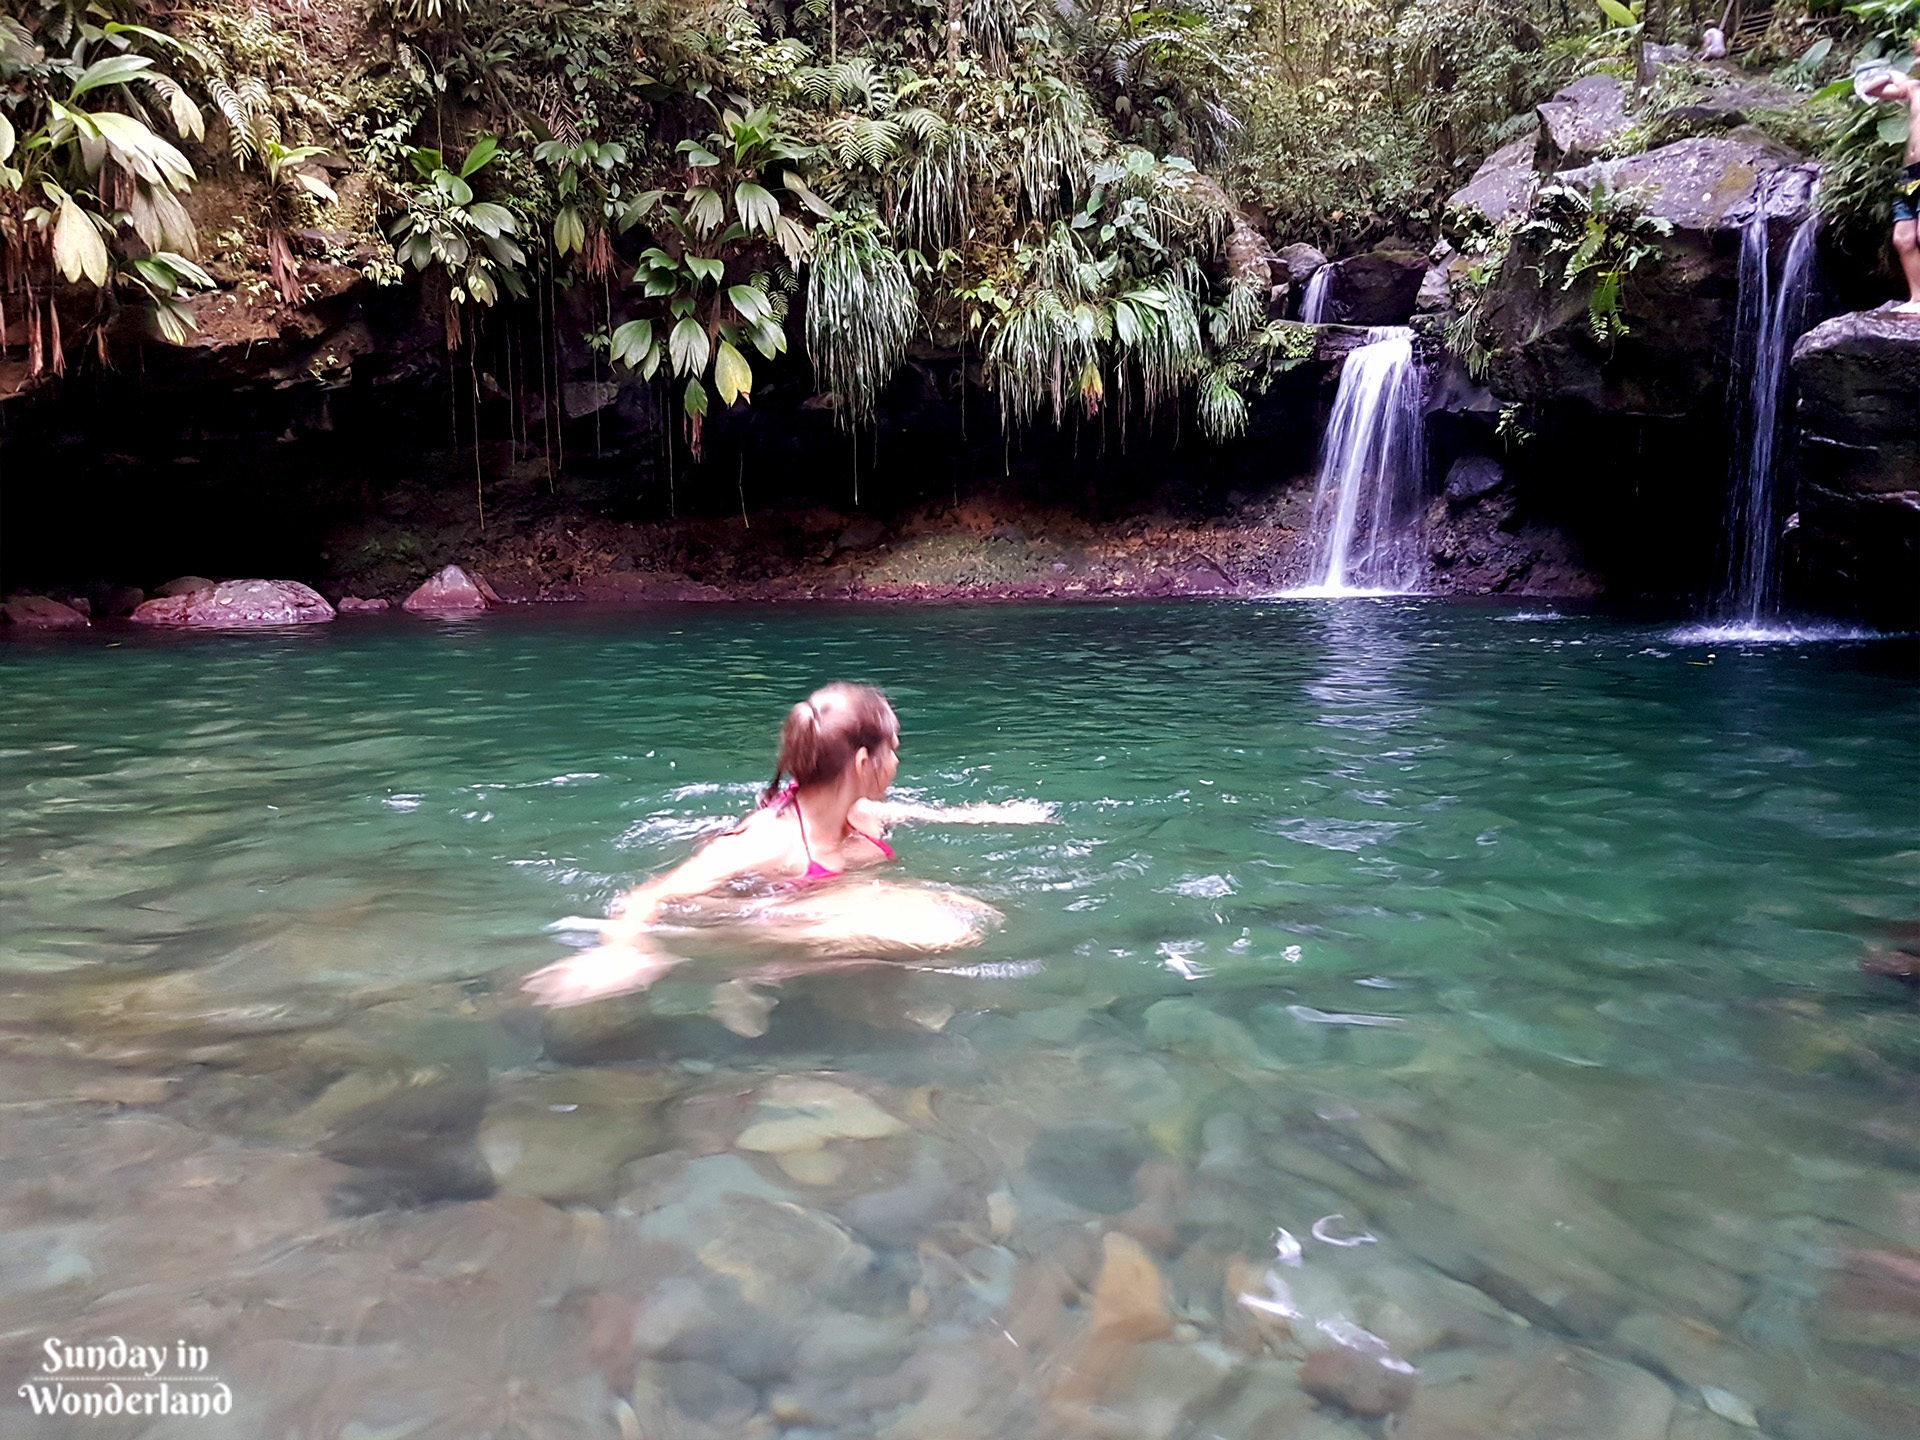 A relief and relax in a chill water of Bassin Paradise - Guadeloupe - Sunday in Wonderland Blog